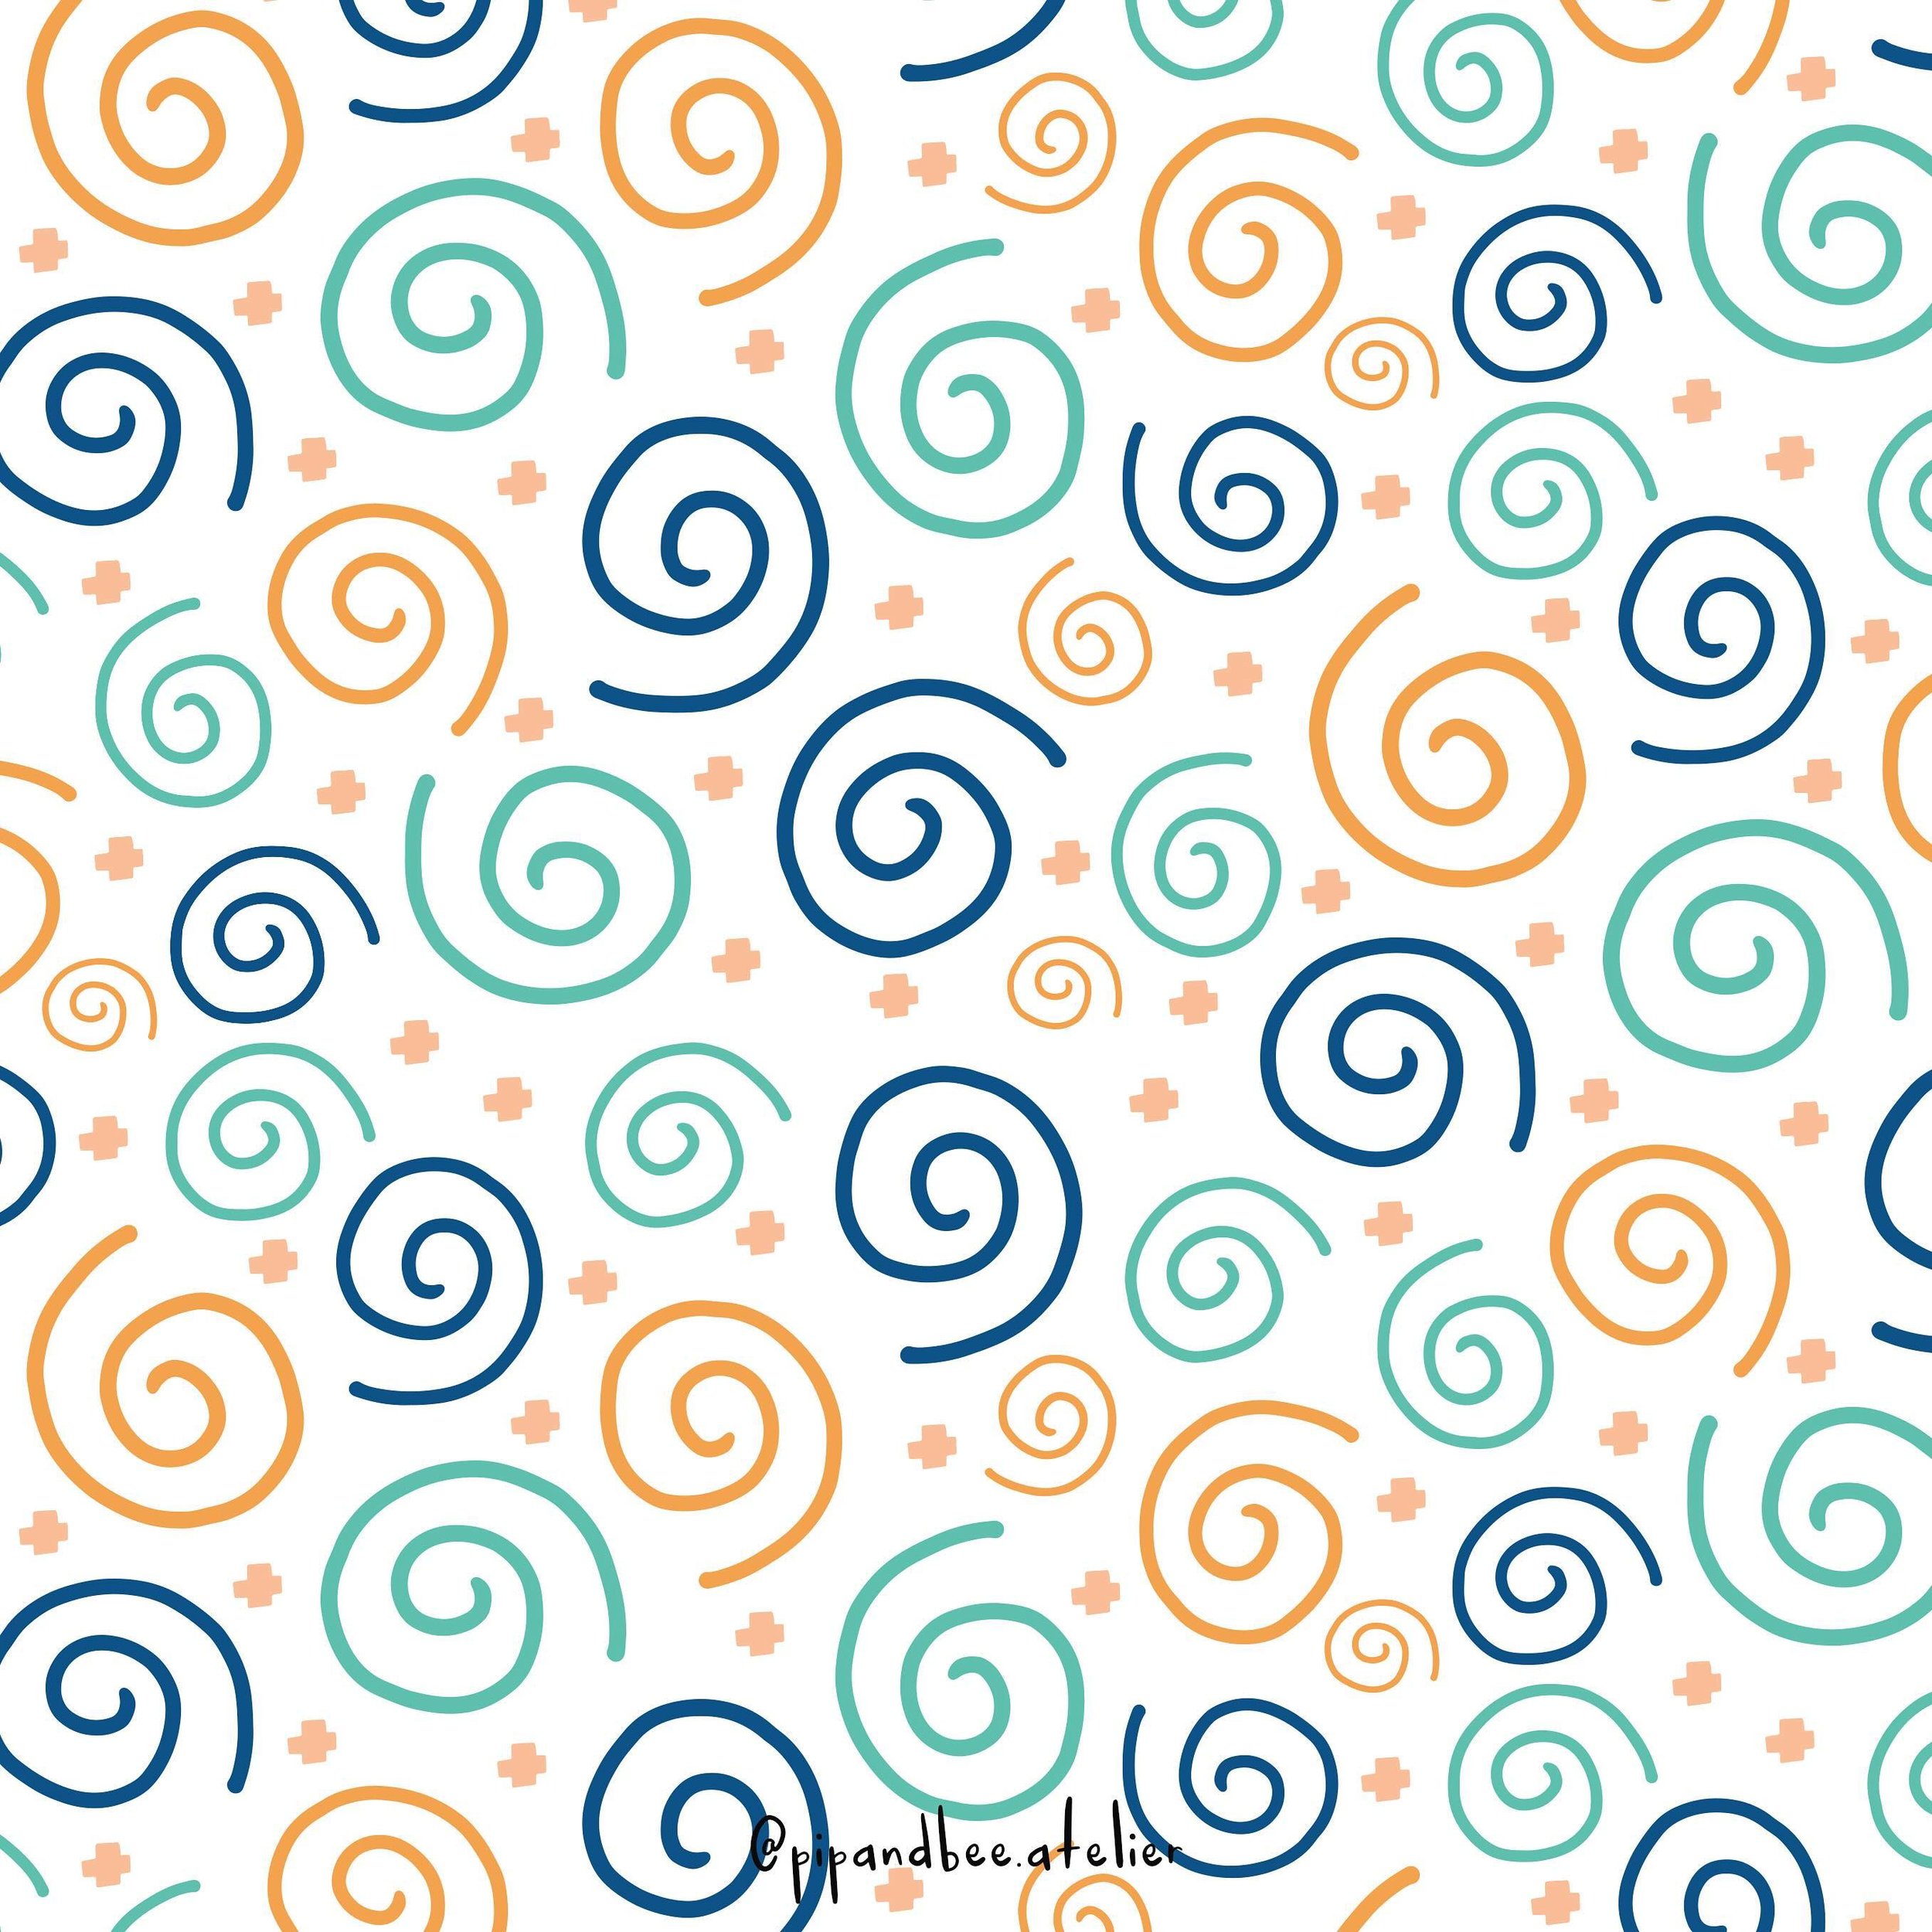 Crazy little swirl pattern 🍥
I&rsquo;d be intrigued to know what type of product you think this would look good on?

I&rsquo;ll show you this week what I have in mind 😍

#pattern #swirls #swirlpattern #crazypattern #kidspattern #patternlove #fundes